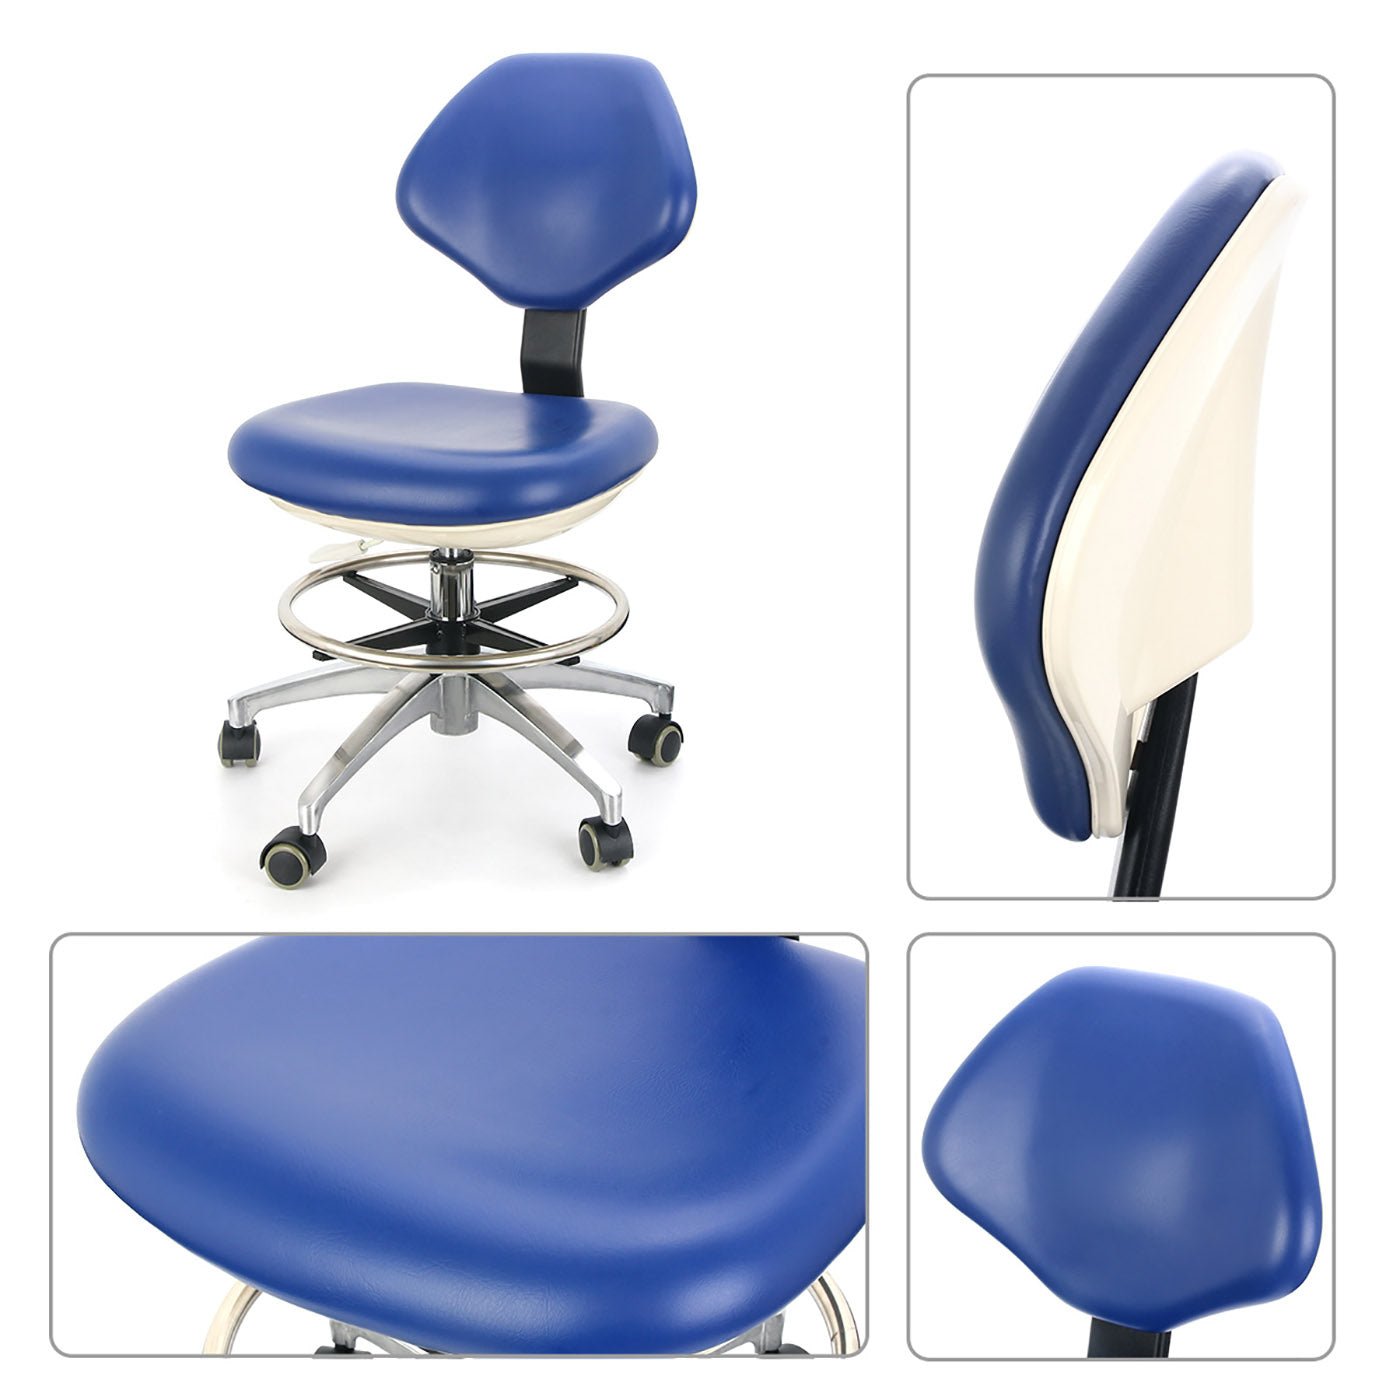 Dental Doctor Stool With Adjustable Seat And Backrest 360-Degree Rotated Blue